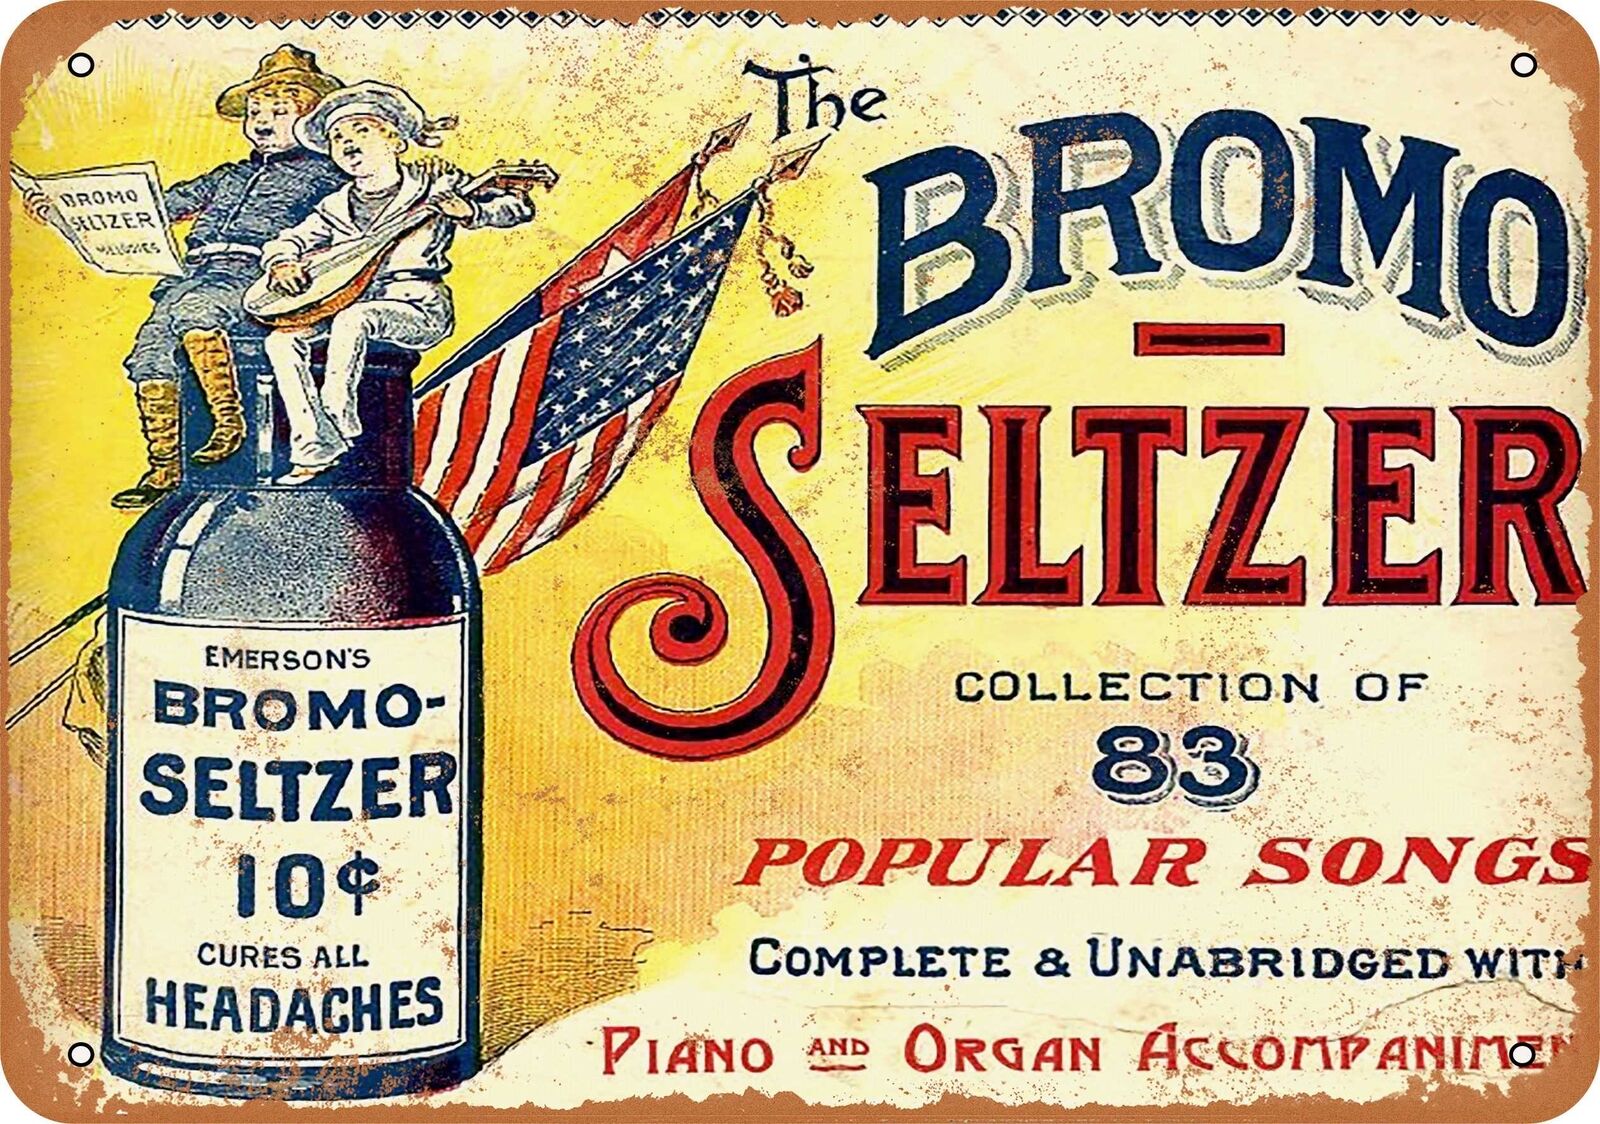 Metal Sign - 1899 Emerson's Bromo-Seltzer - Vintage Look Reproduction